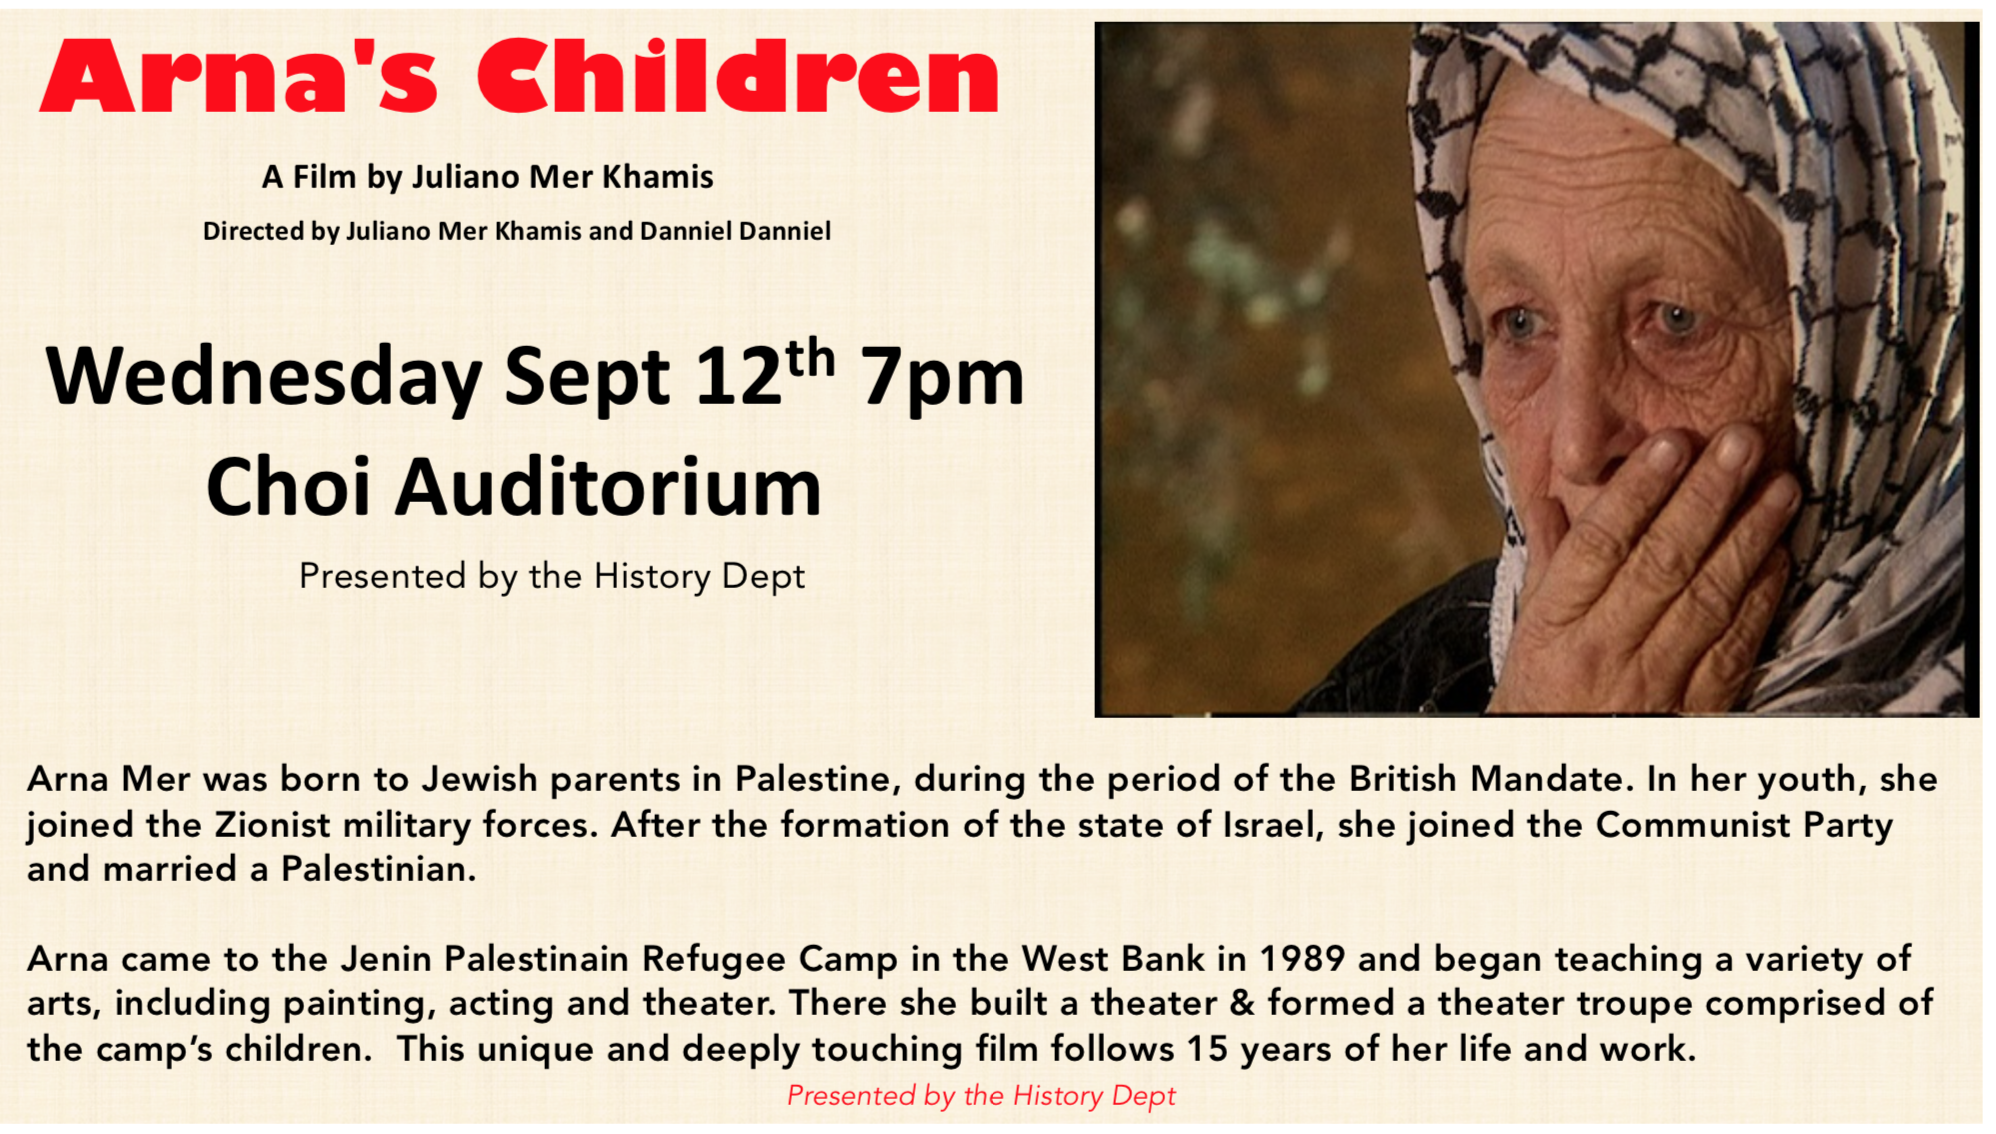 Image for Israel Palestine Film Series Event